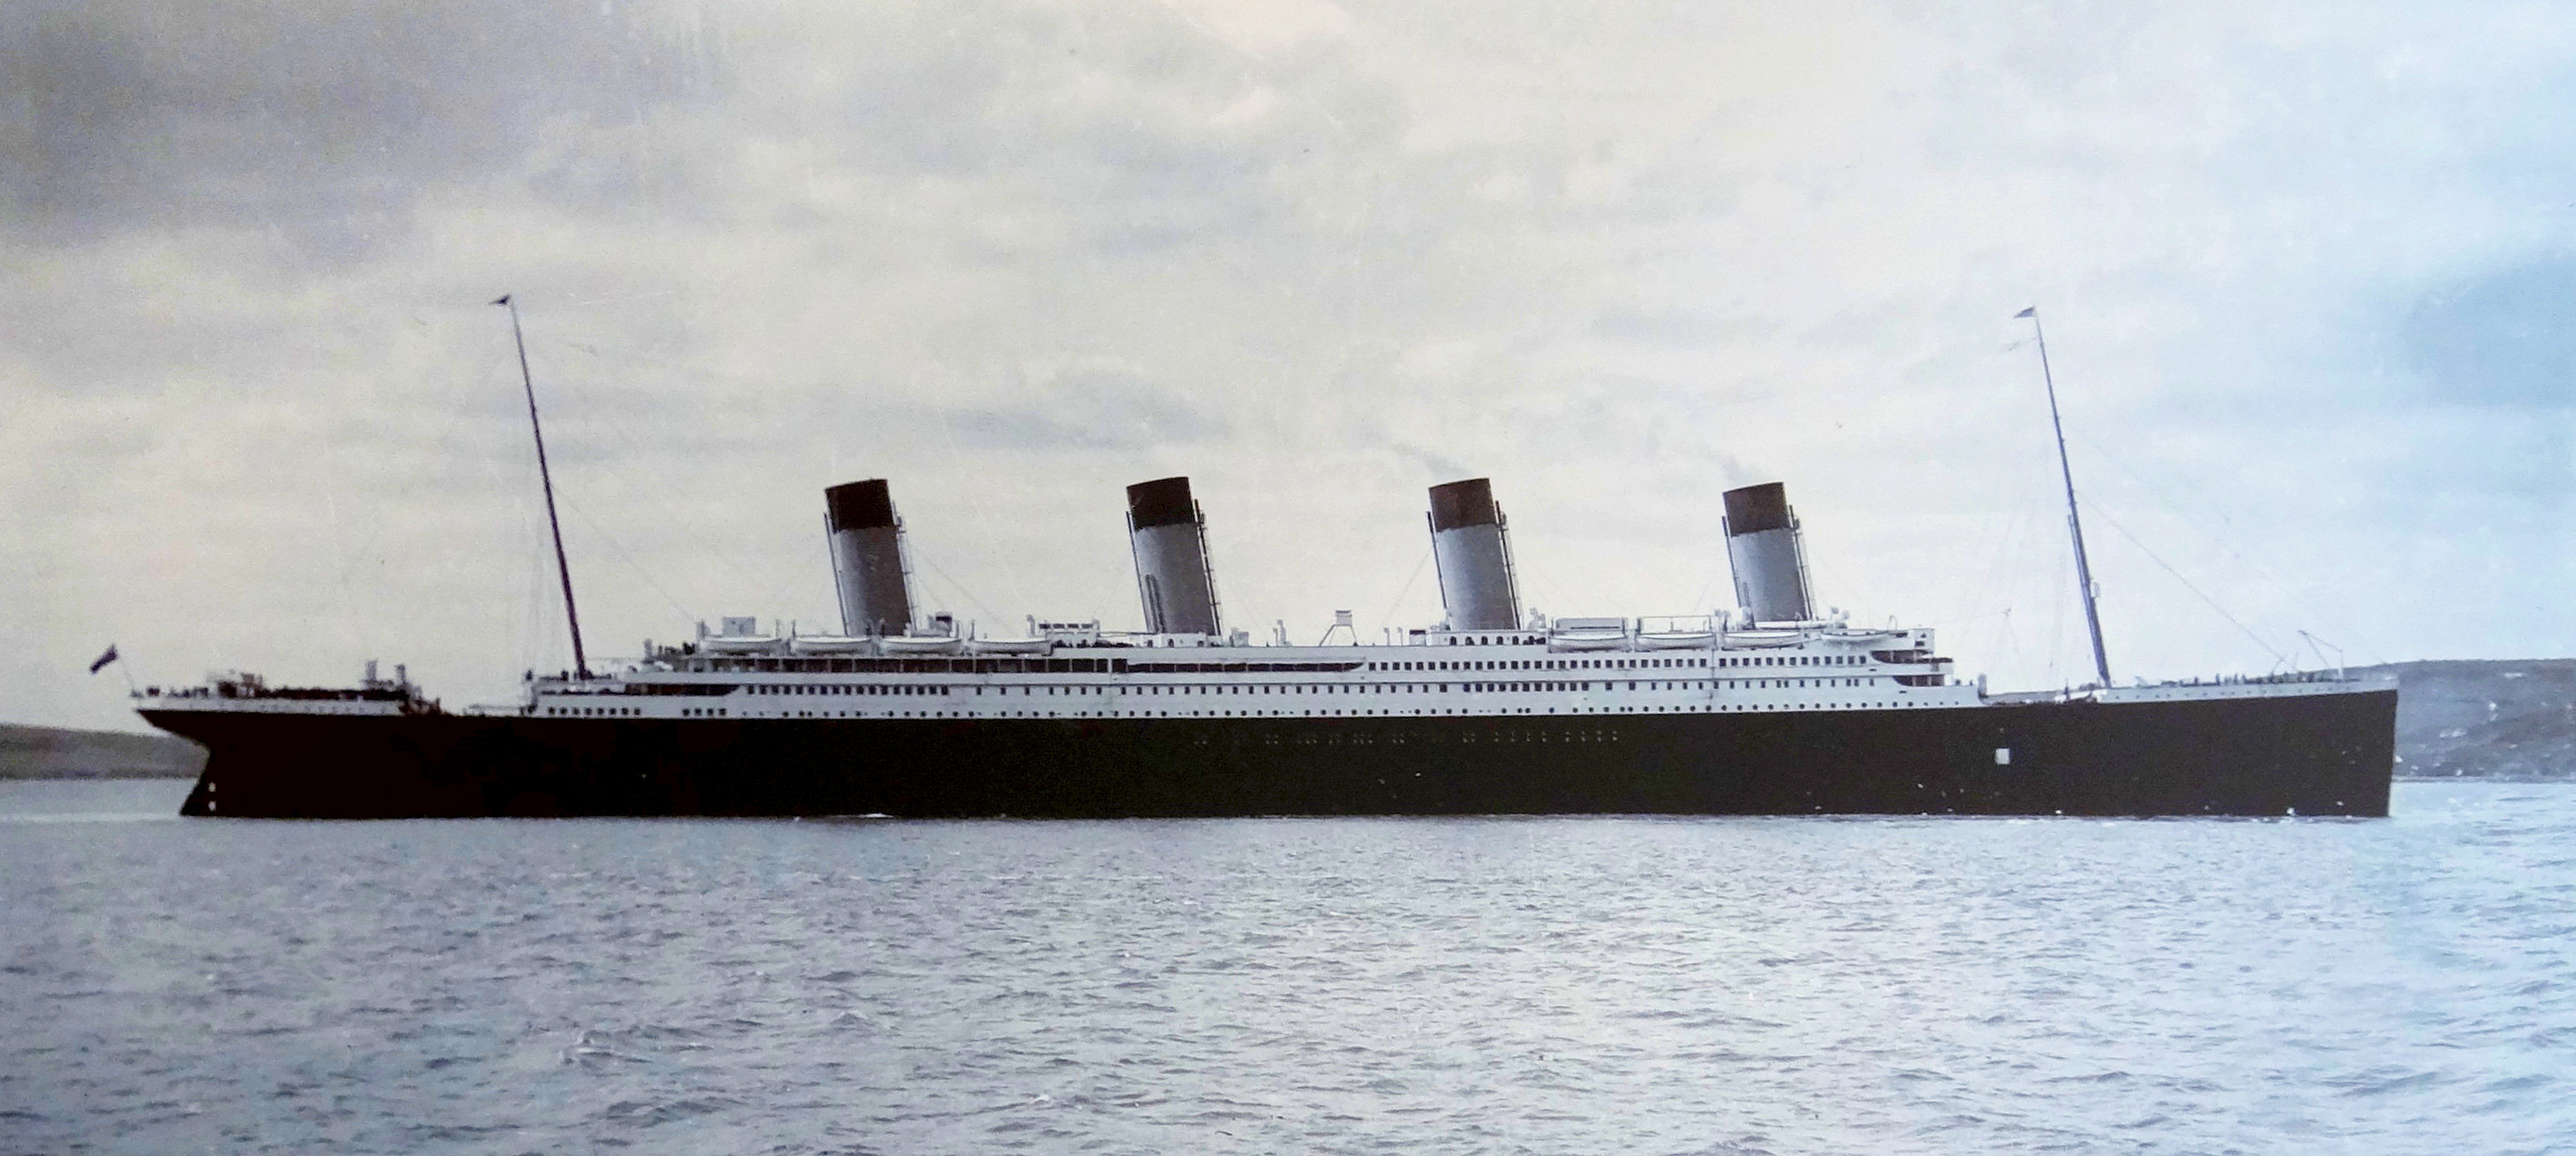 12 Things You Should Know About Rms Titanic 5 Minutes With Joe